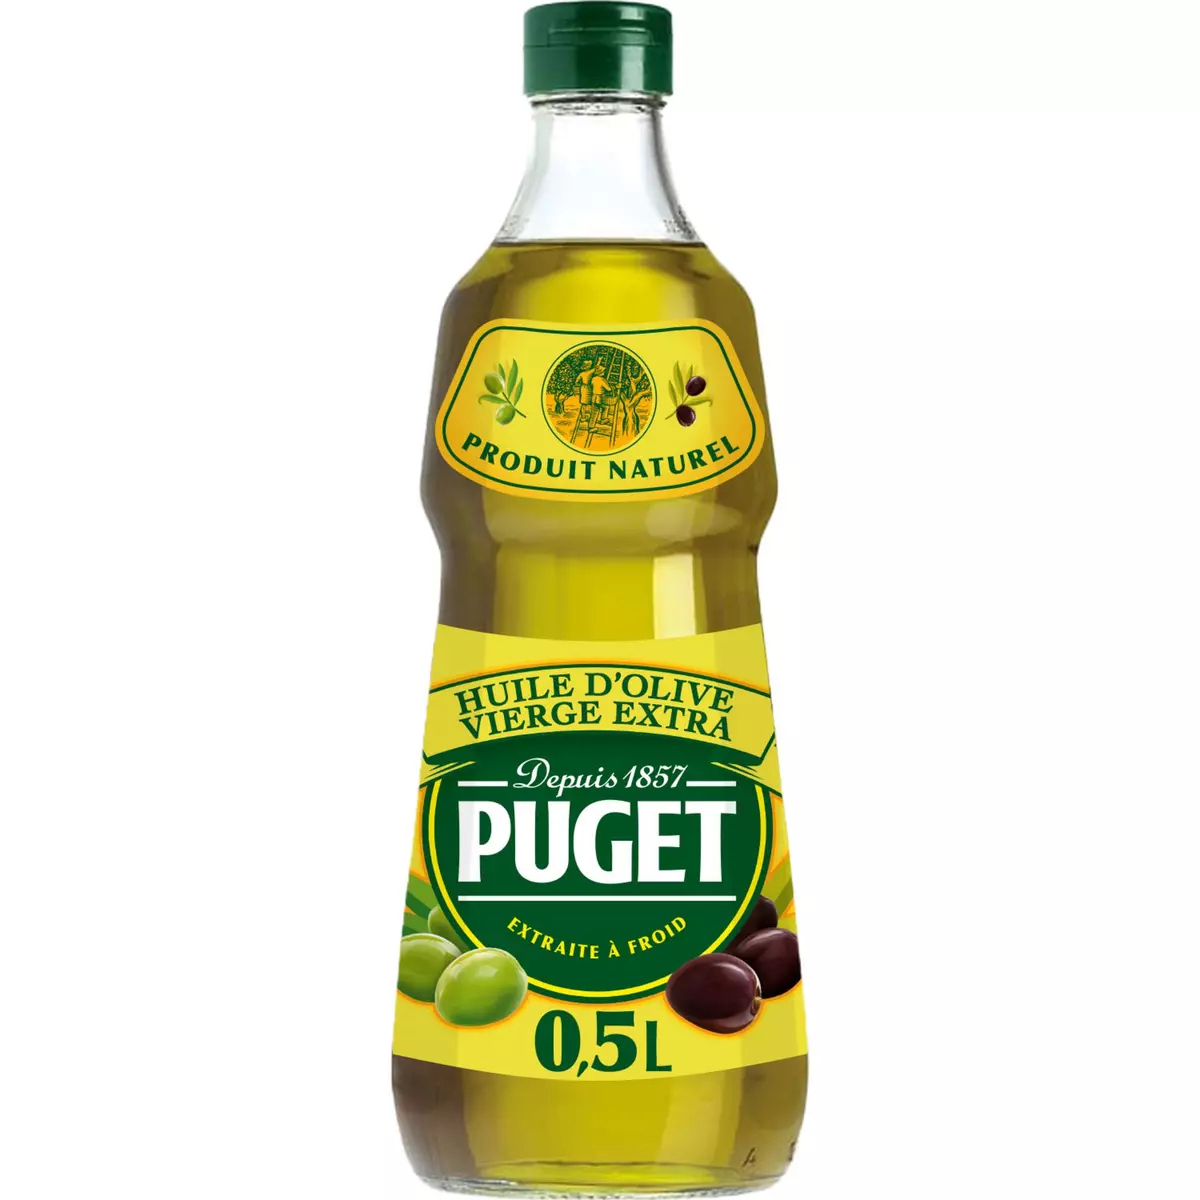 PUGET Huile d'olive vierge extra 50cl